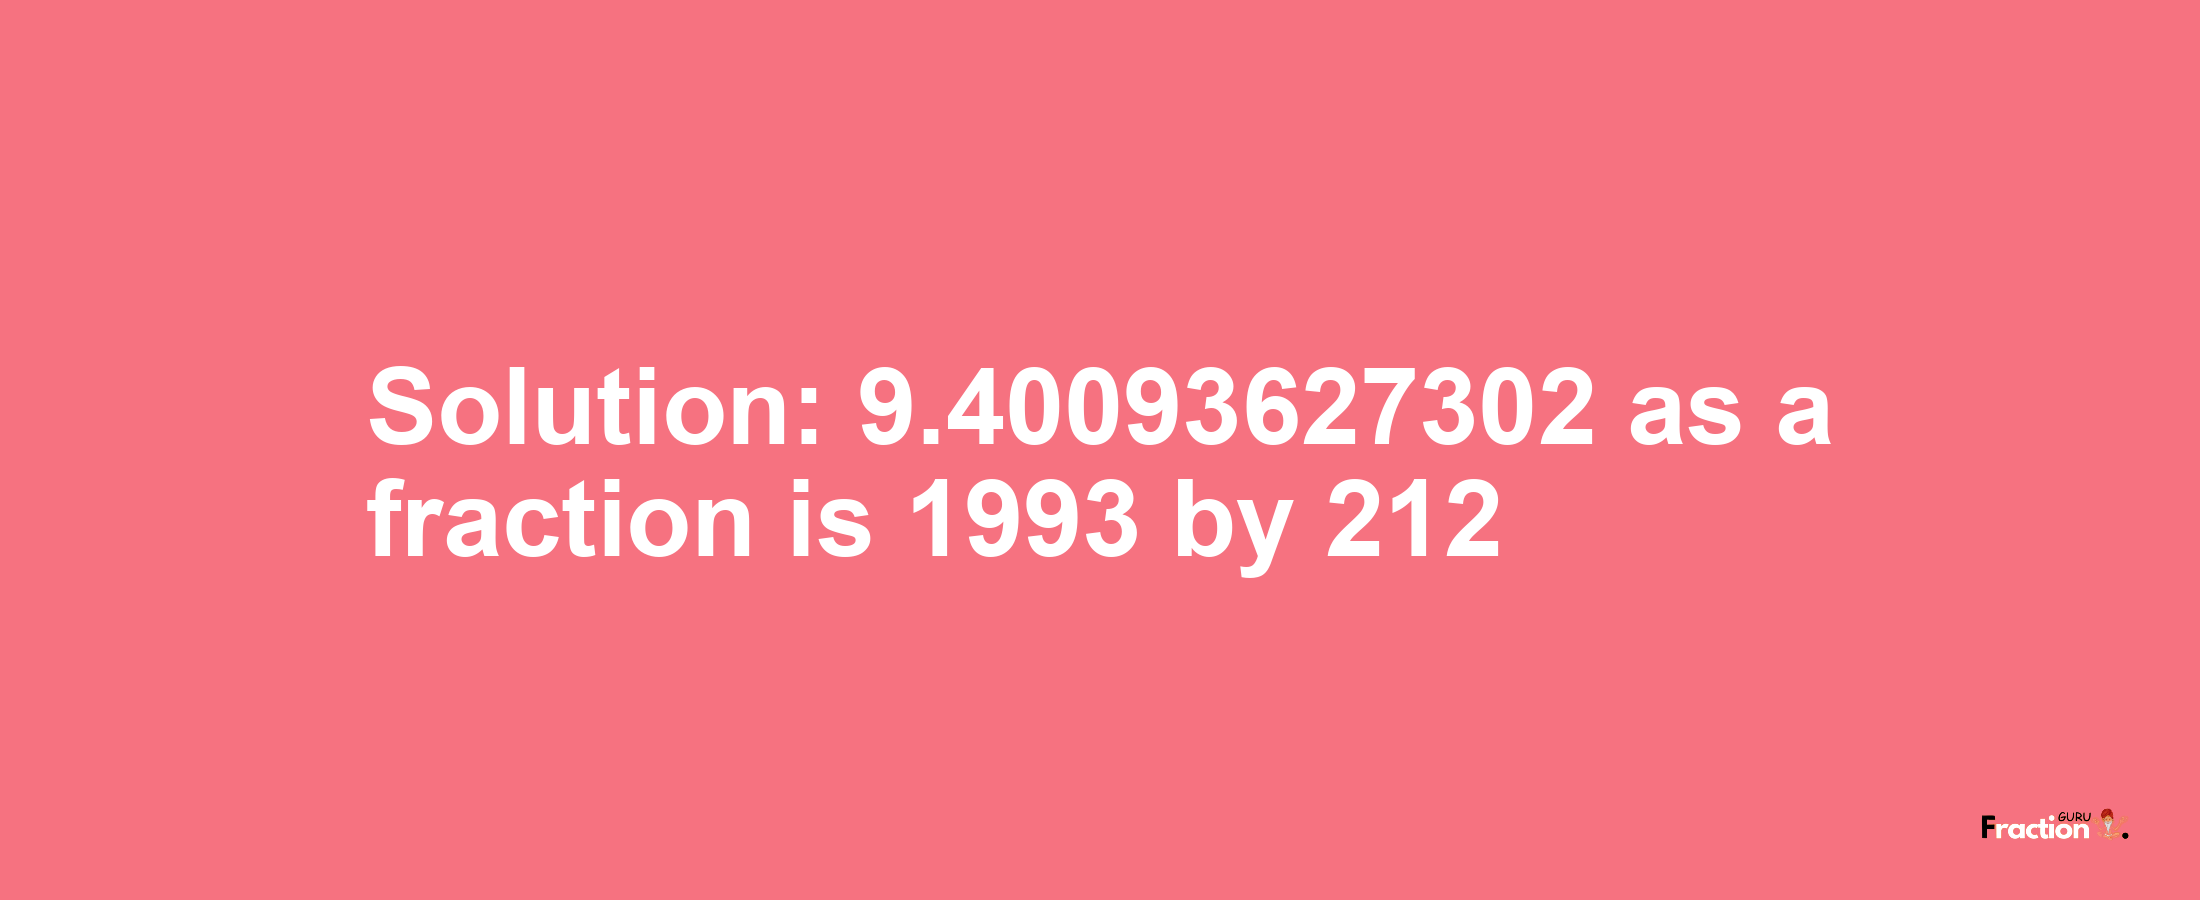 Solution:9.40093627302 as a fraction is 1993/212